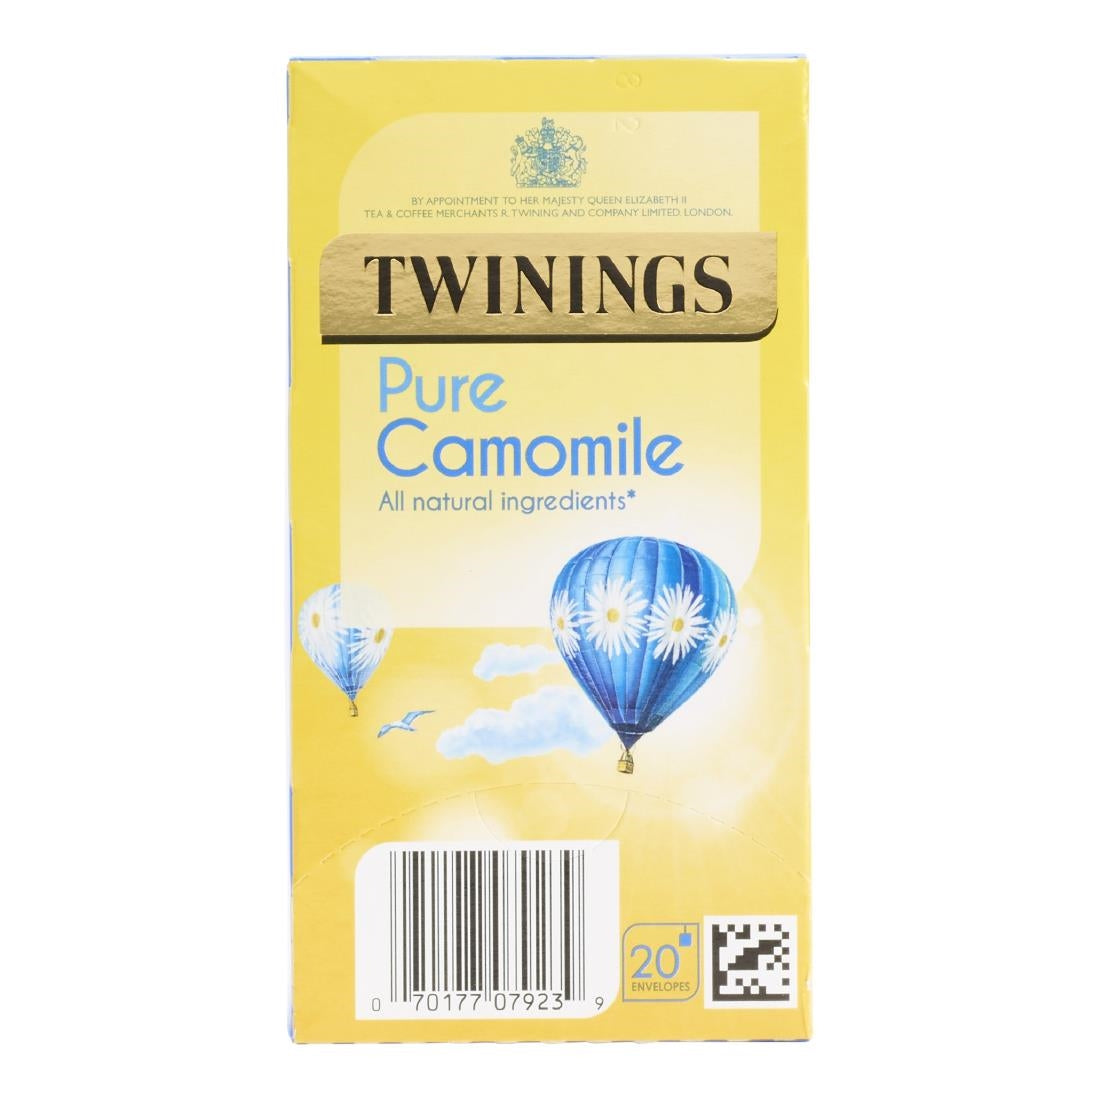 DZ463 Twinings Pure Camomile Enveloped Tea Bags (Pack of 240)